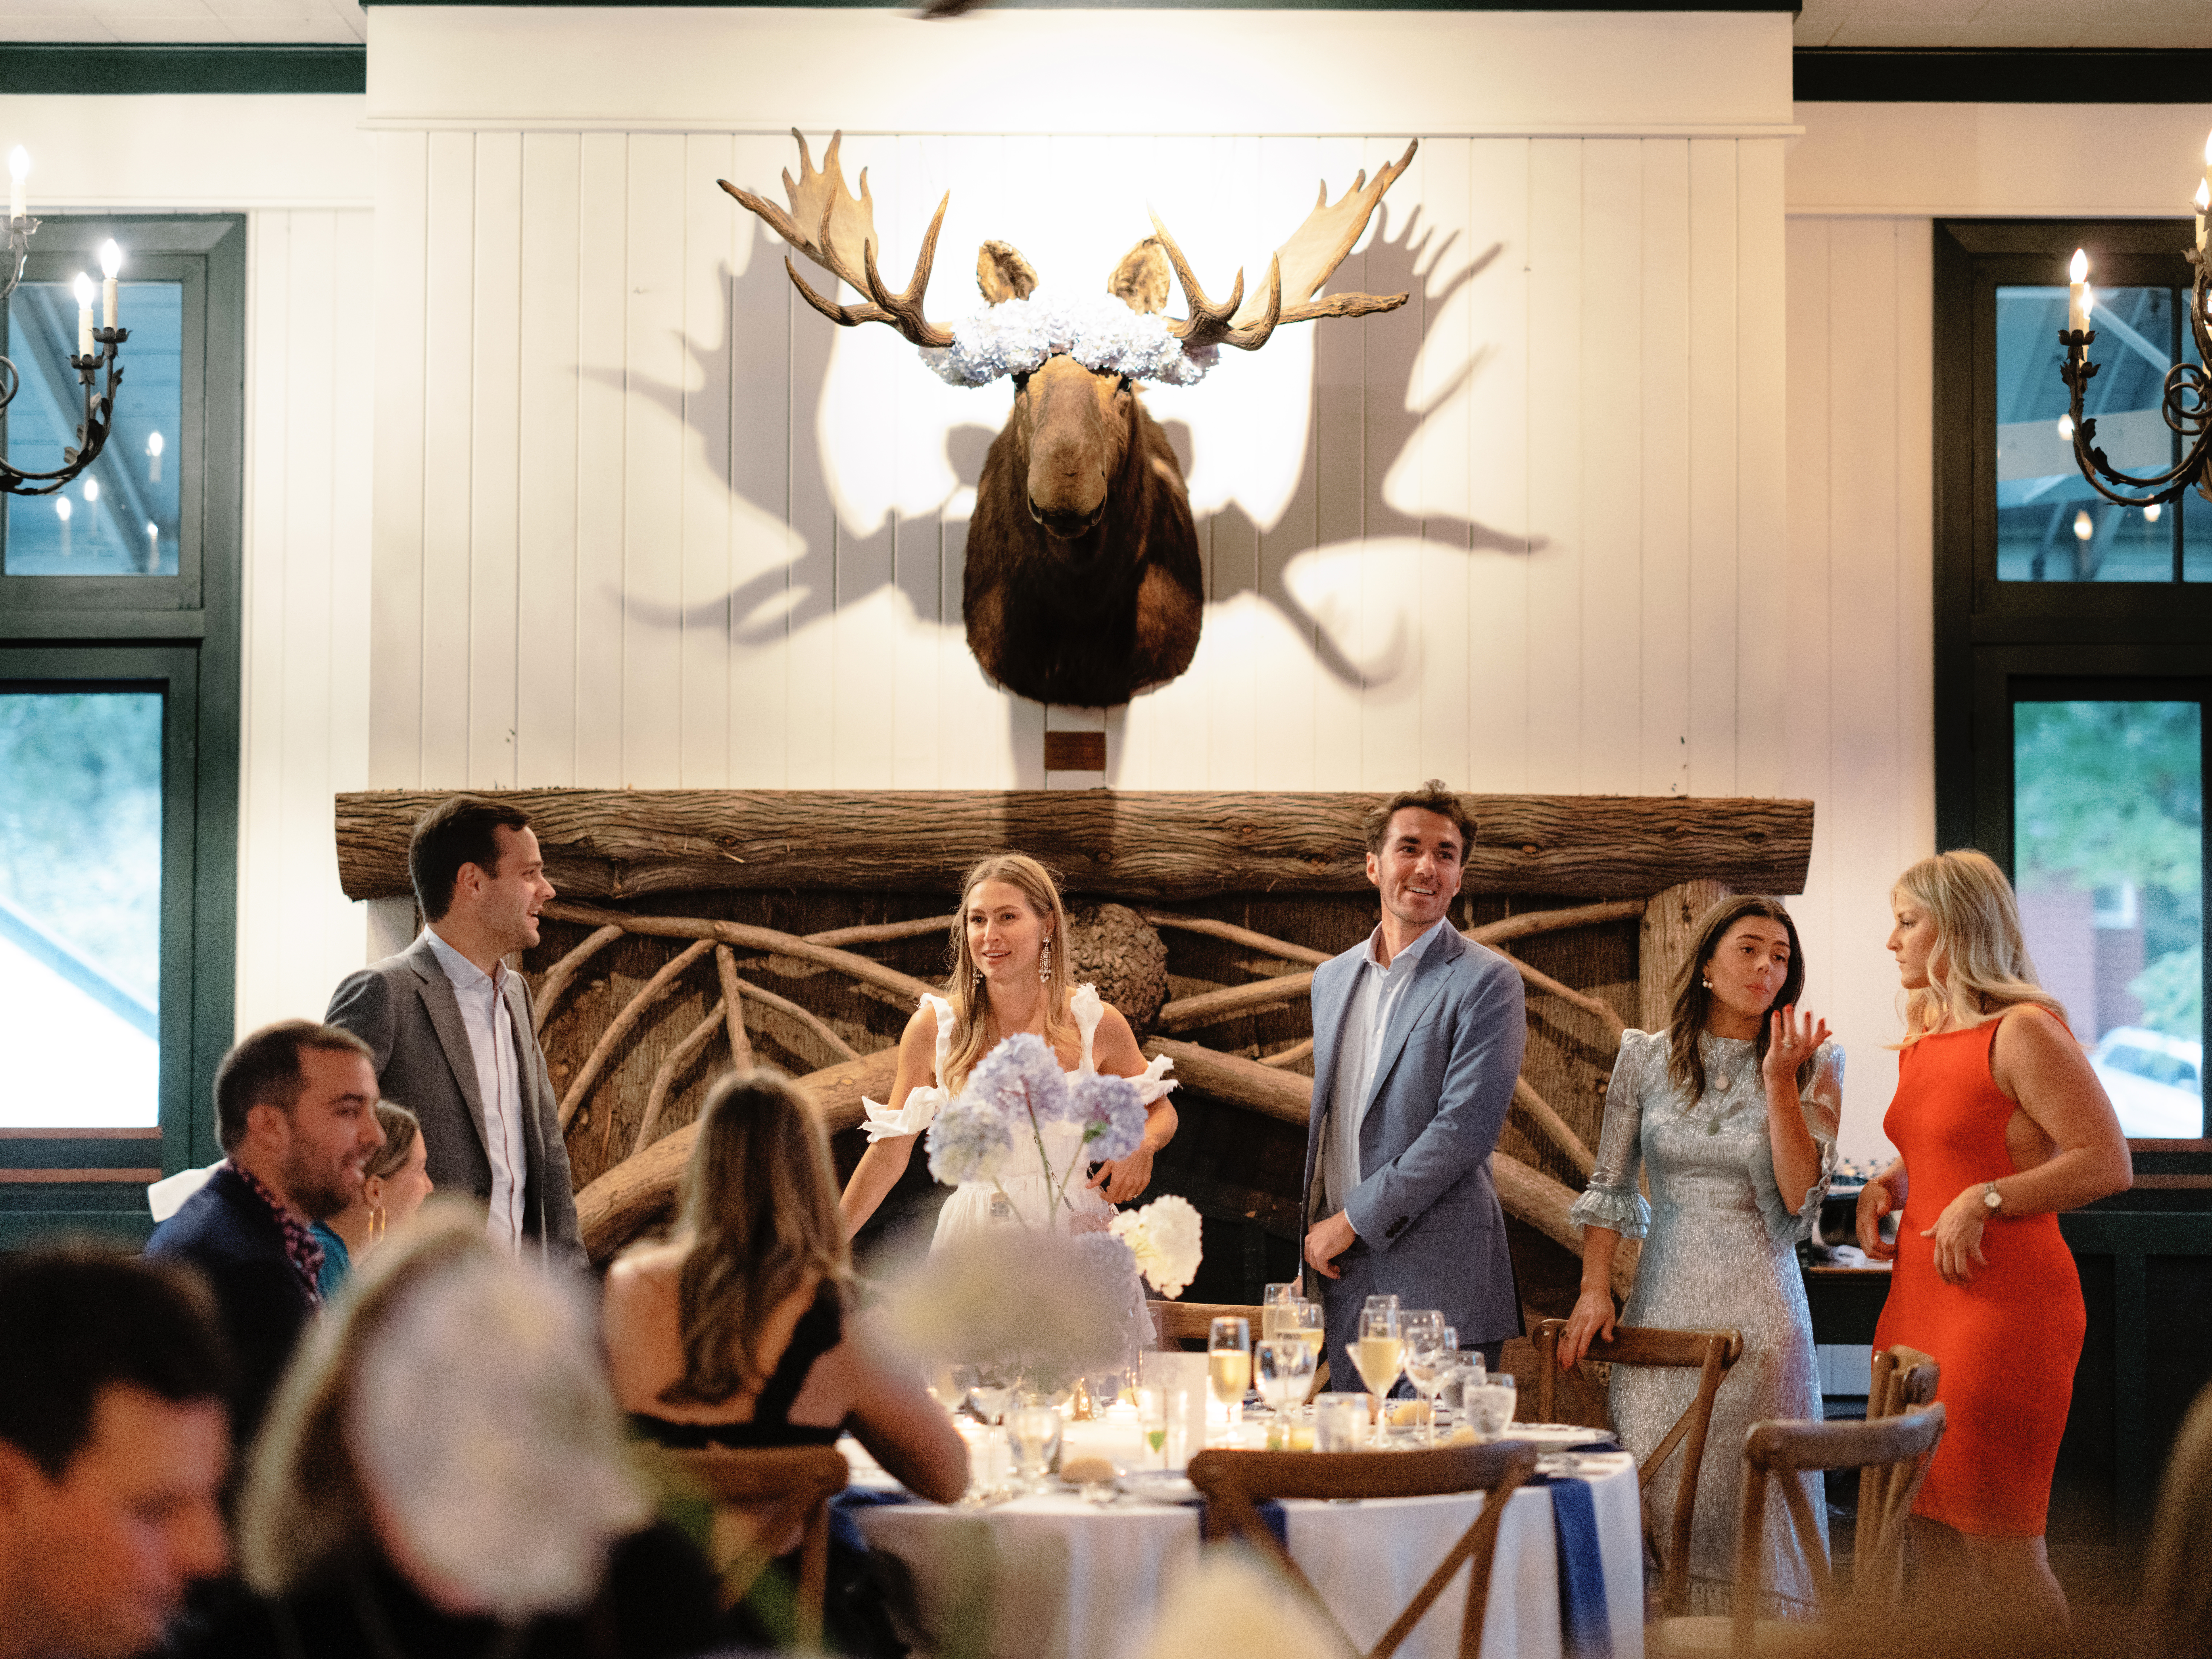 Rehearsal dinner at The Ausable Club. Upstate New York Wedding image by Jenny Fu Studio